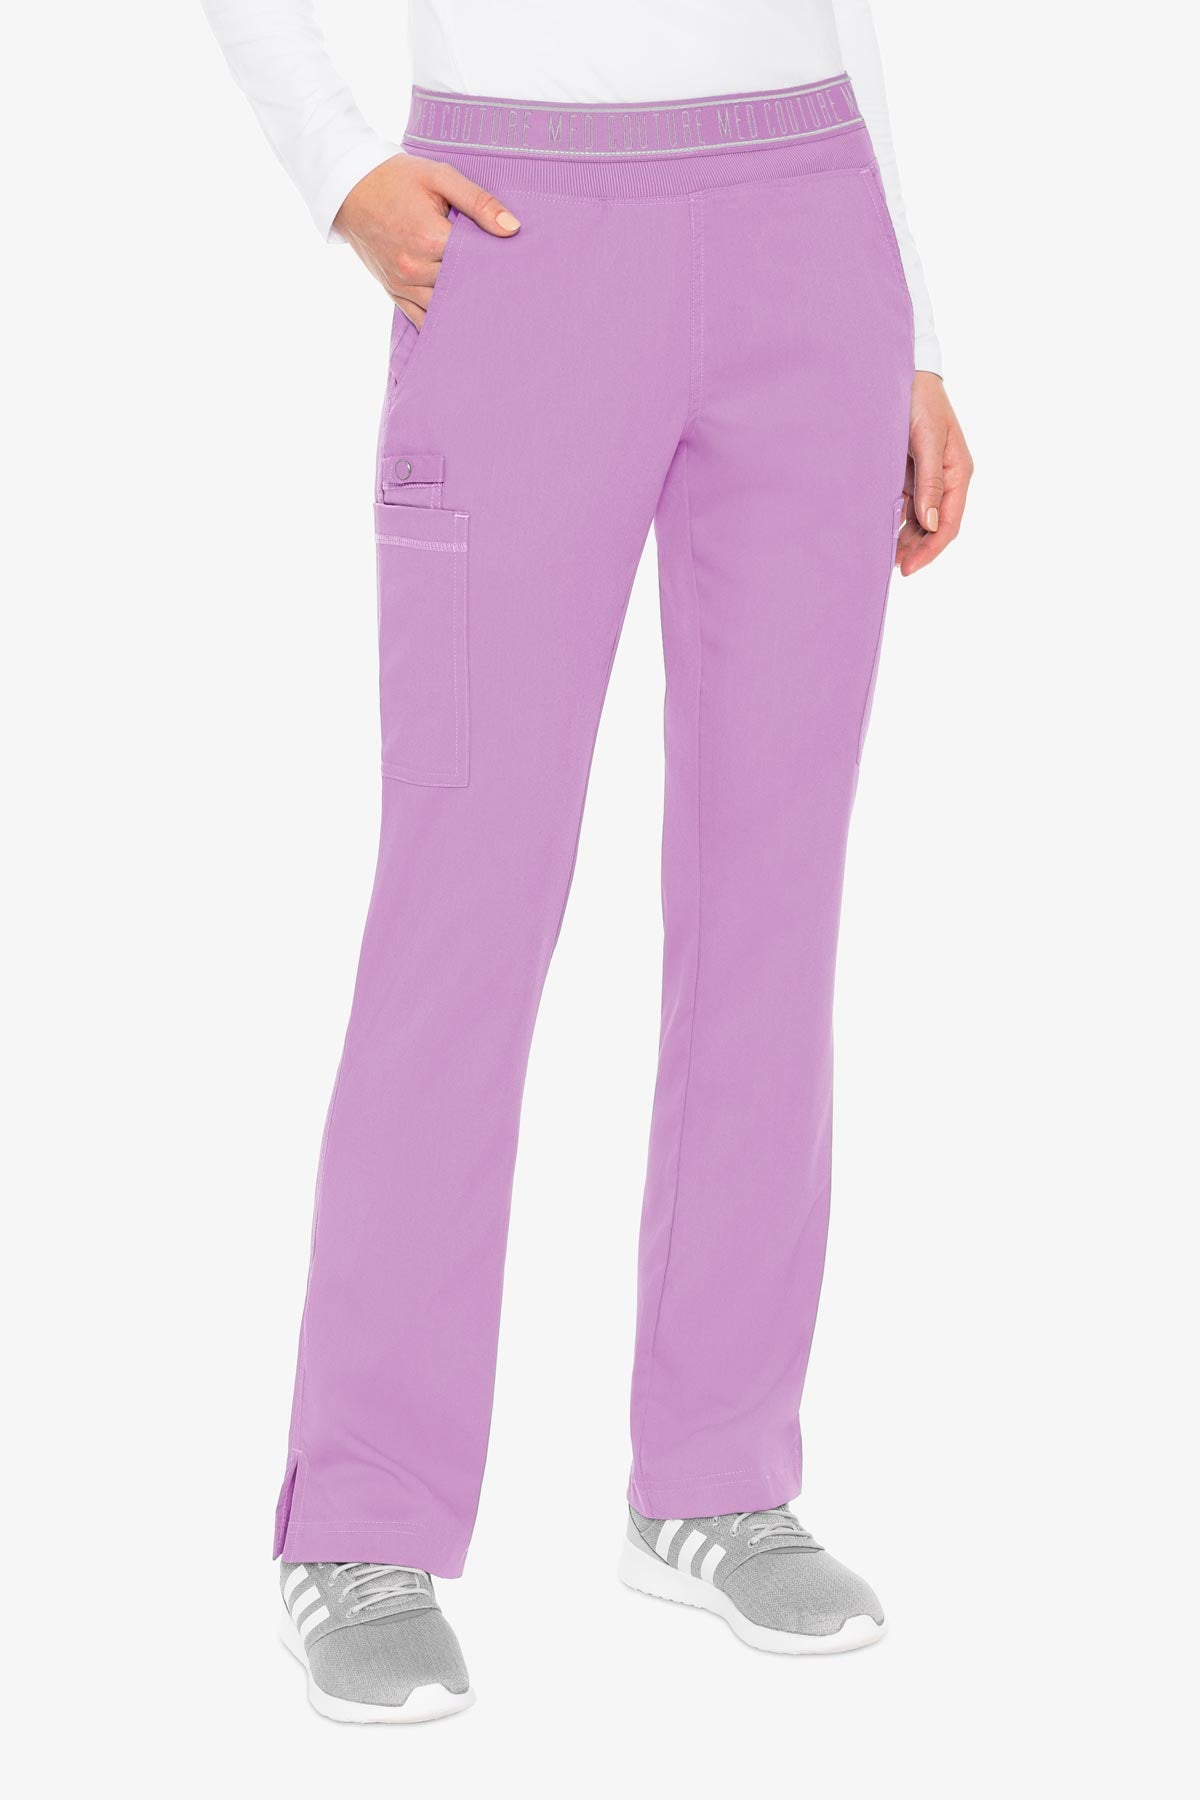 MED COUTURE 7739 YOGA 2 CARGO POCKET PANT